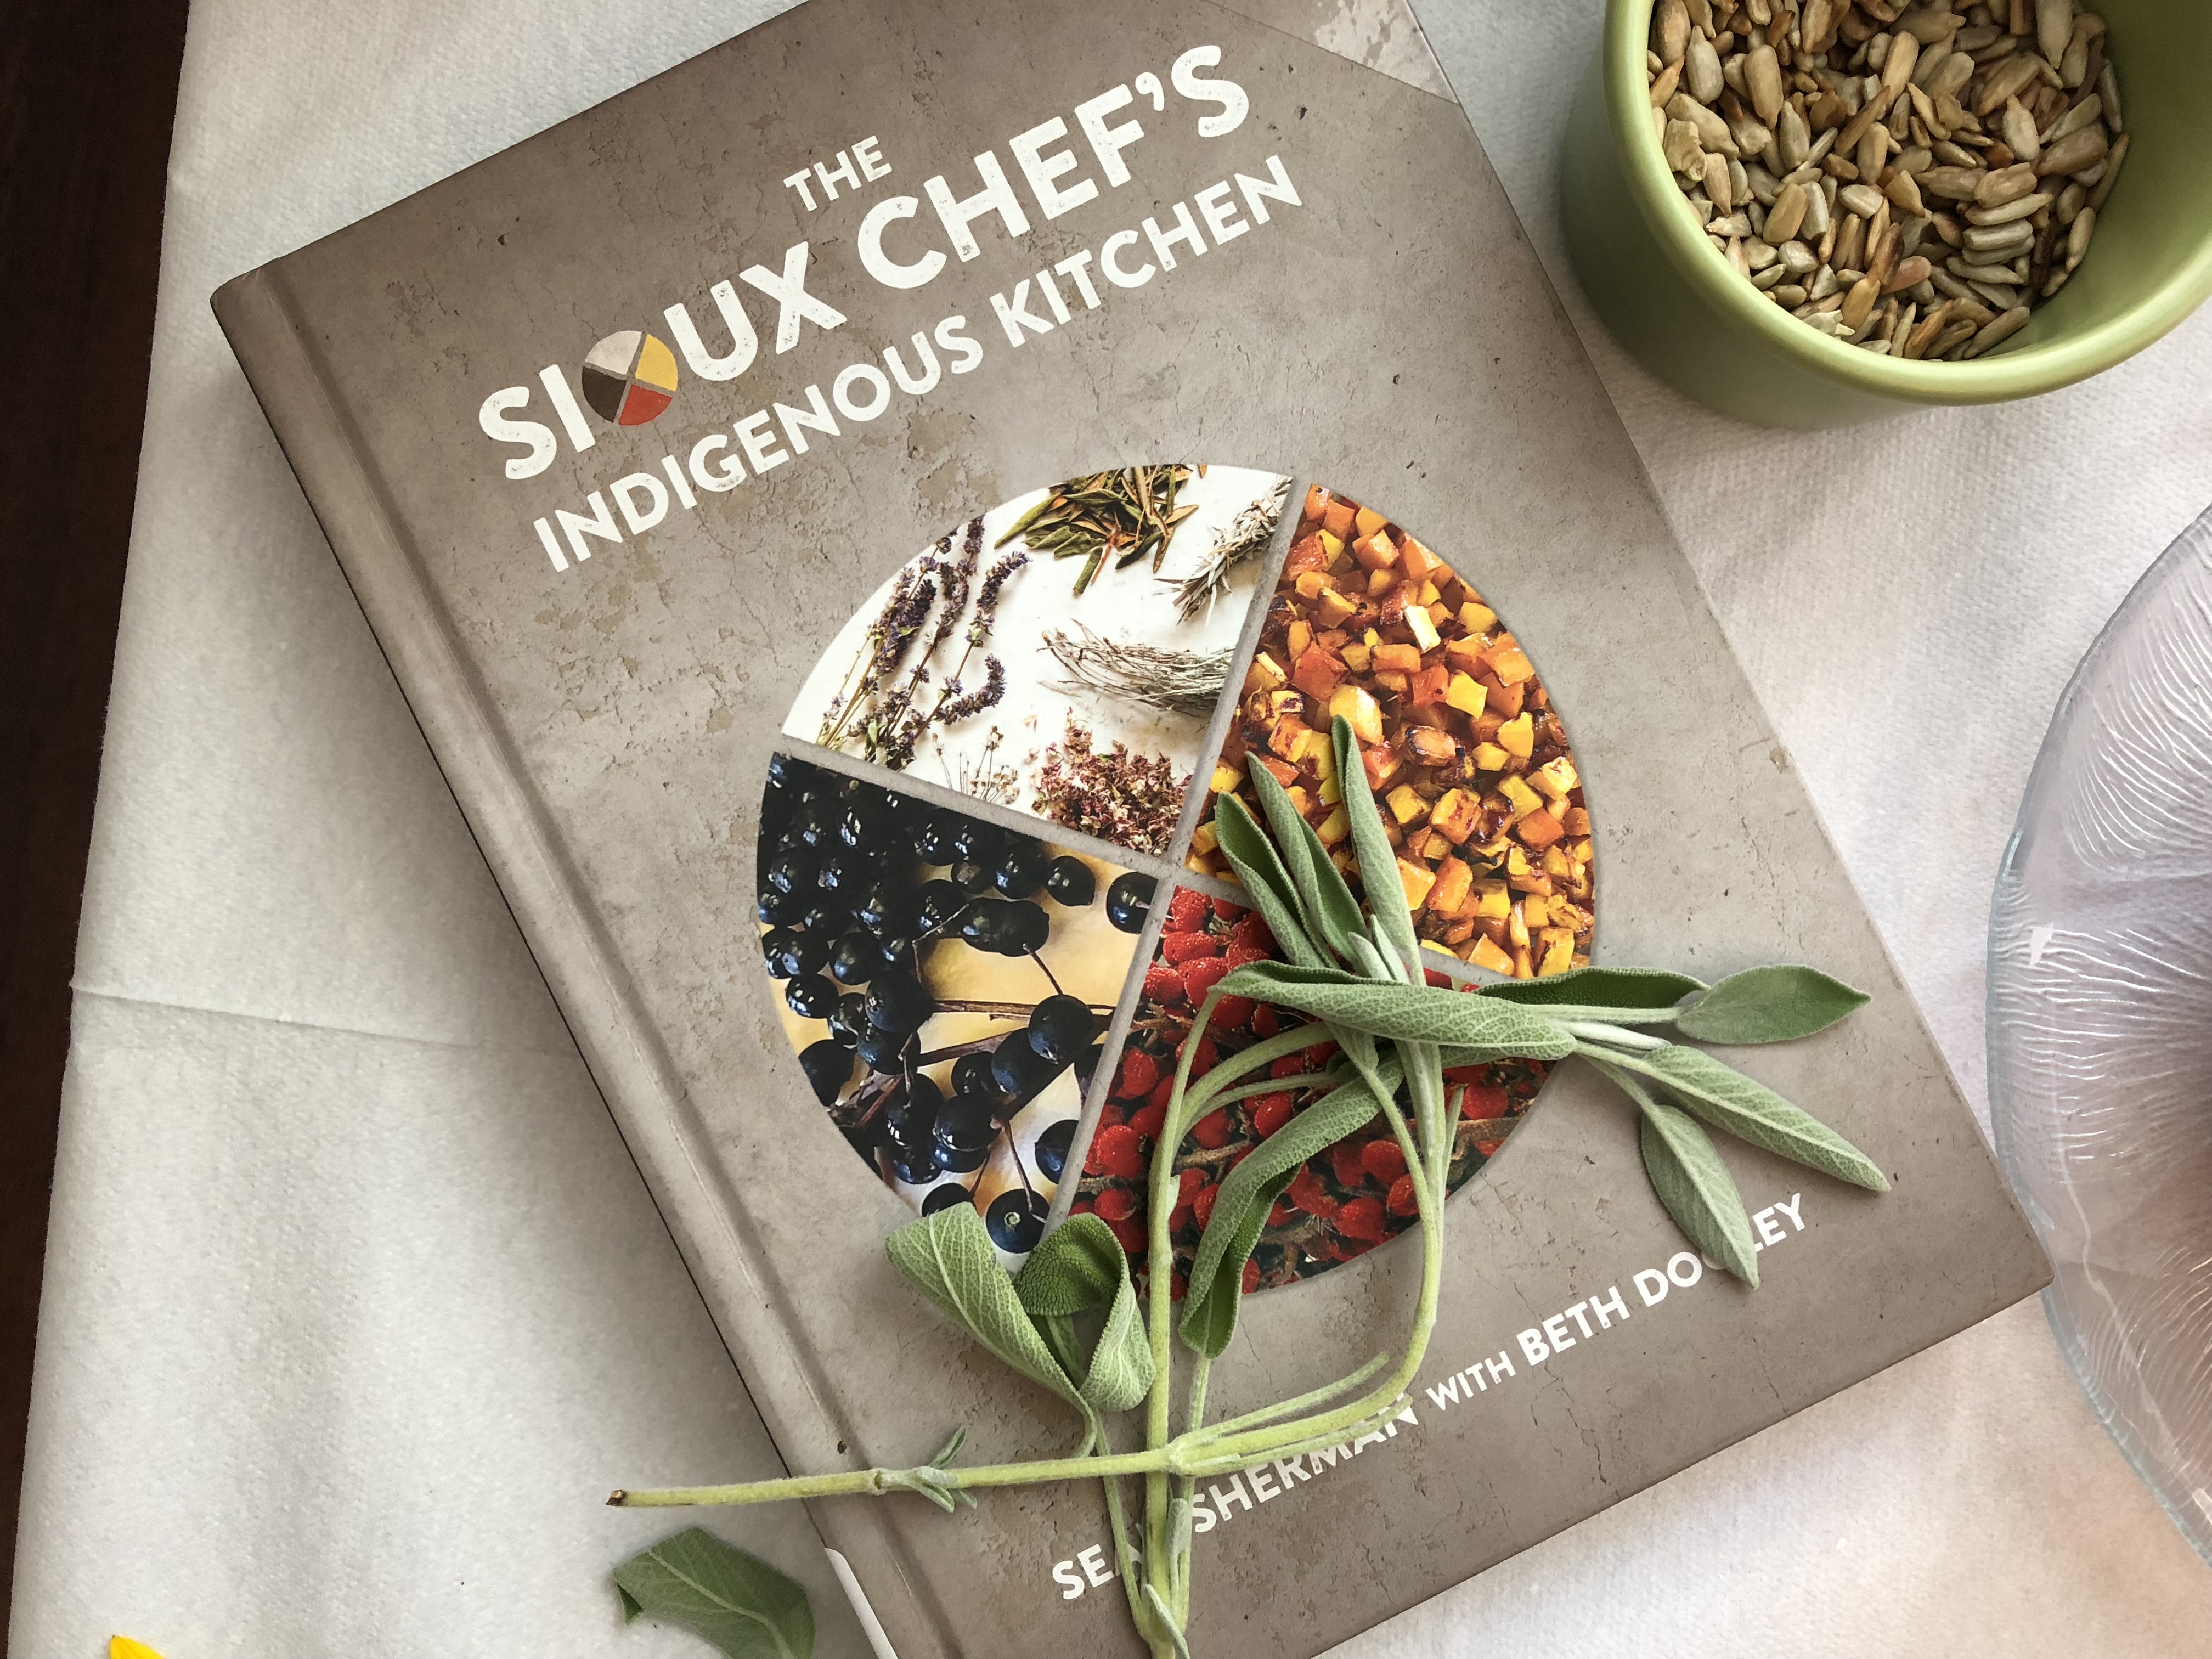 The Sioux Chef’s Indigenous Kitchen cookbook